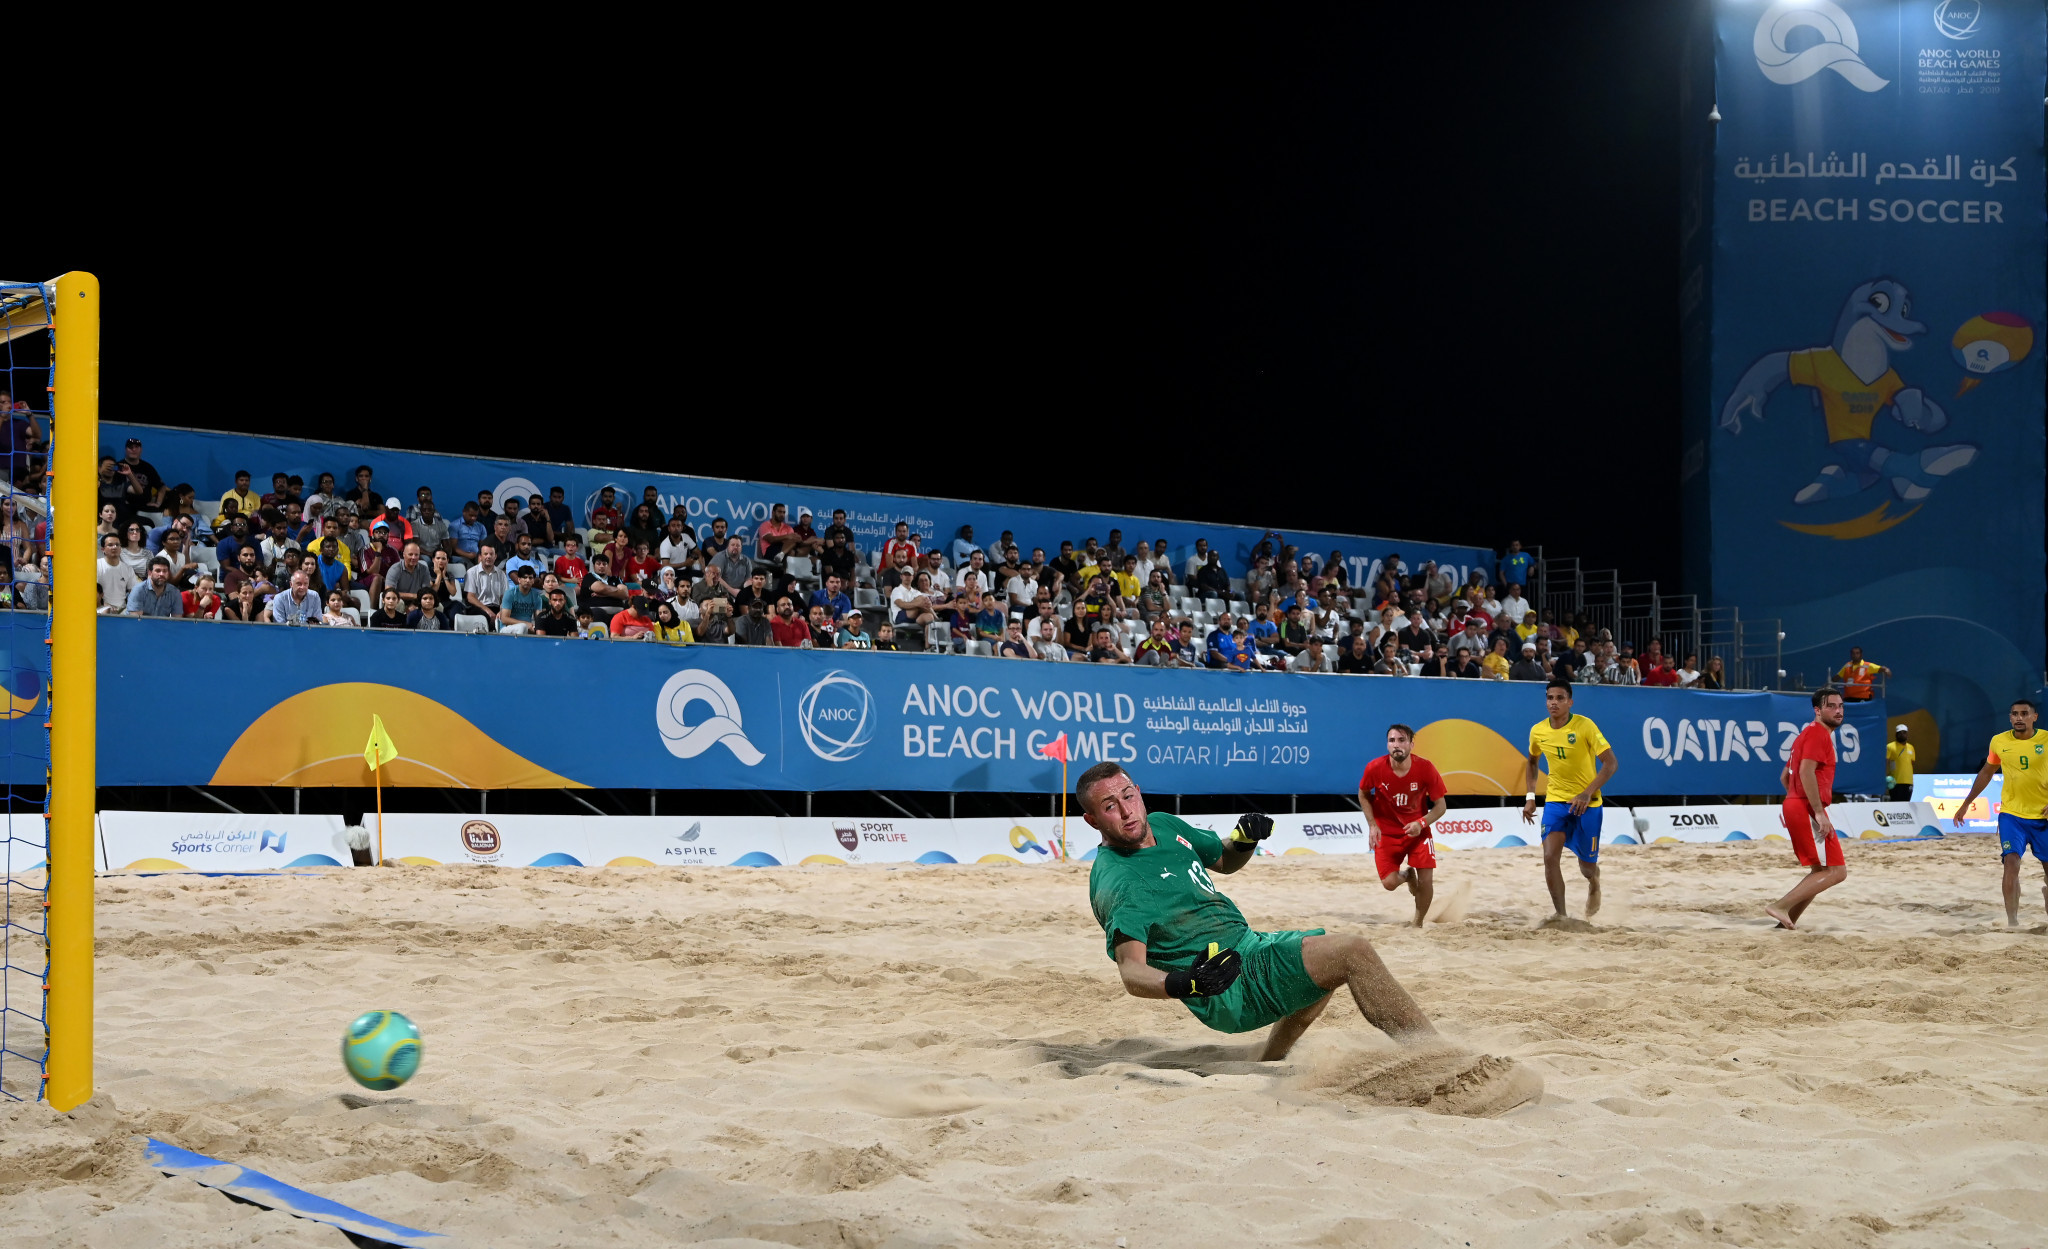 A dedicated subvention may have to be negotiated for a second ANOC World Beach Games, scheduled to be held in 2023 ©Getty Images 